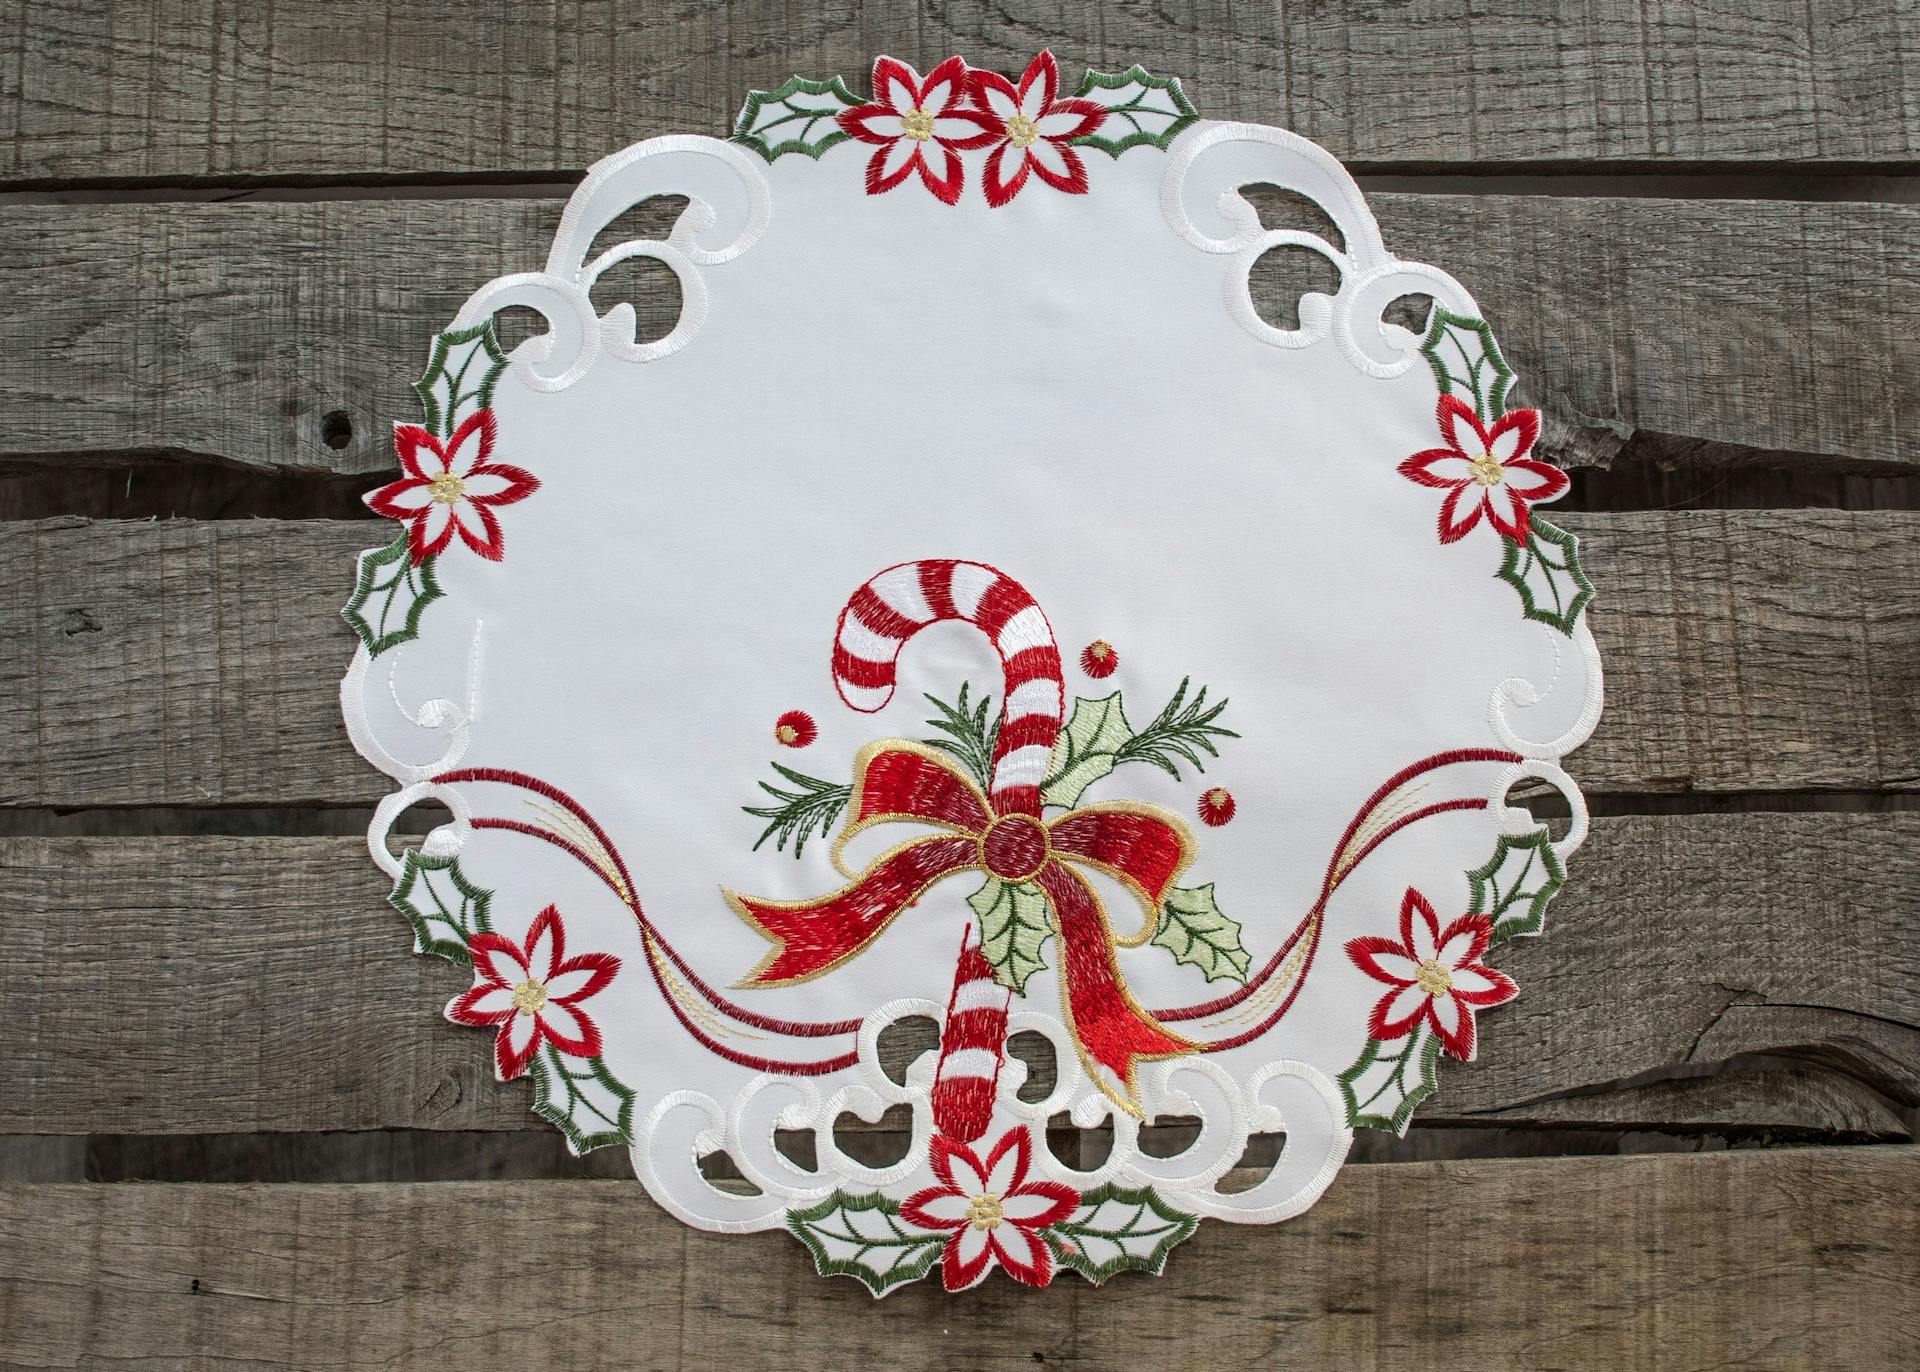 Candy Cane and Holly Leaves Round Doily (15")